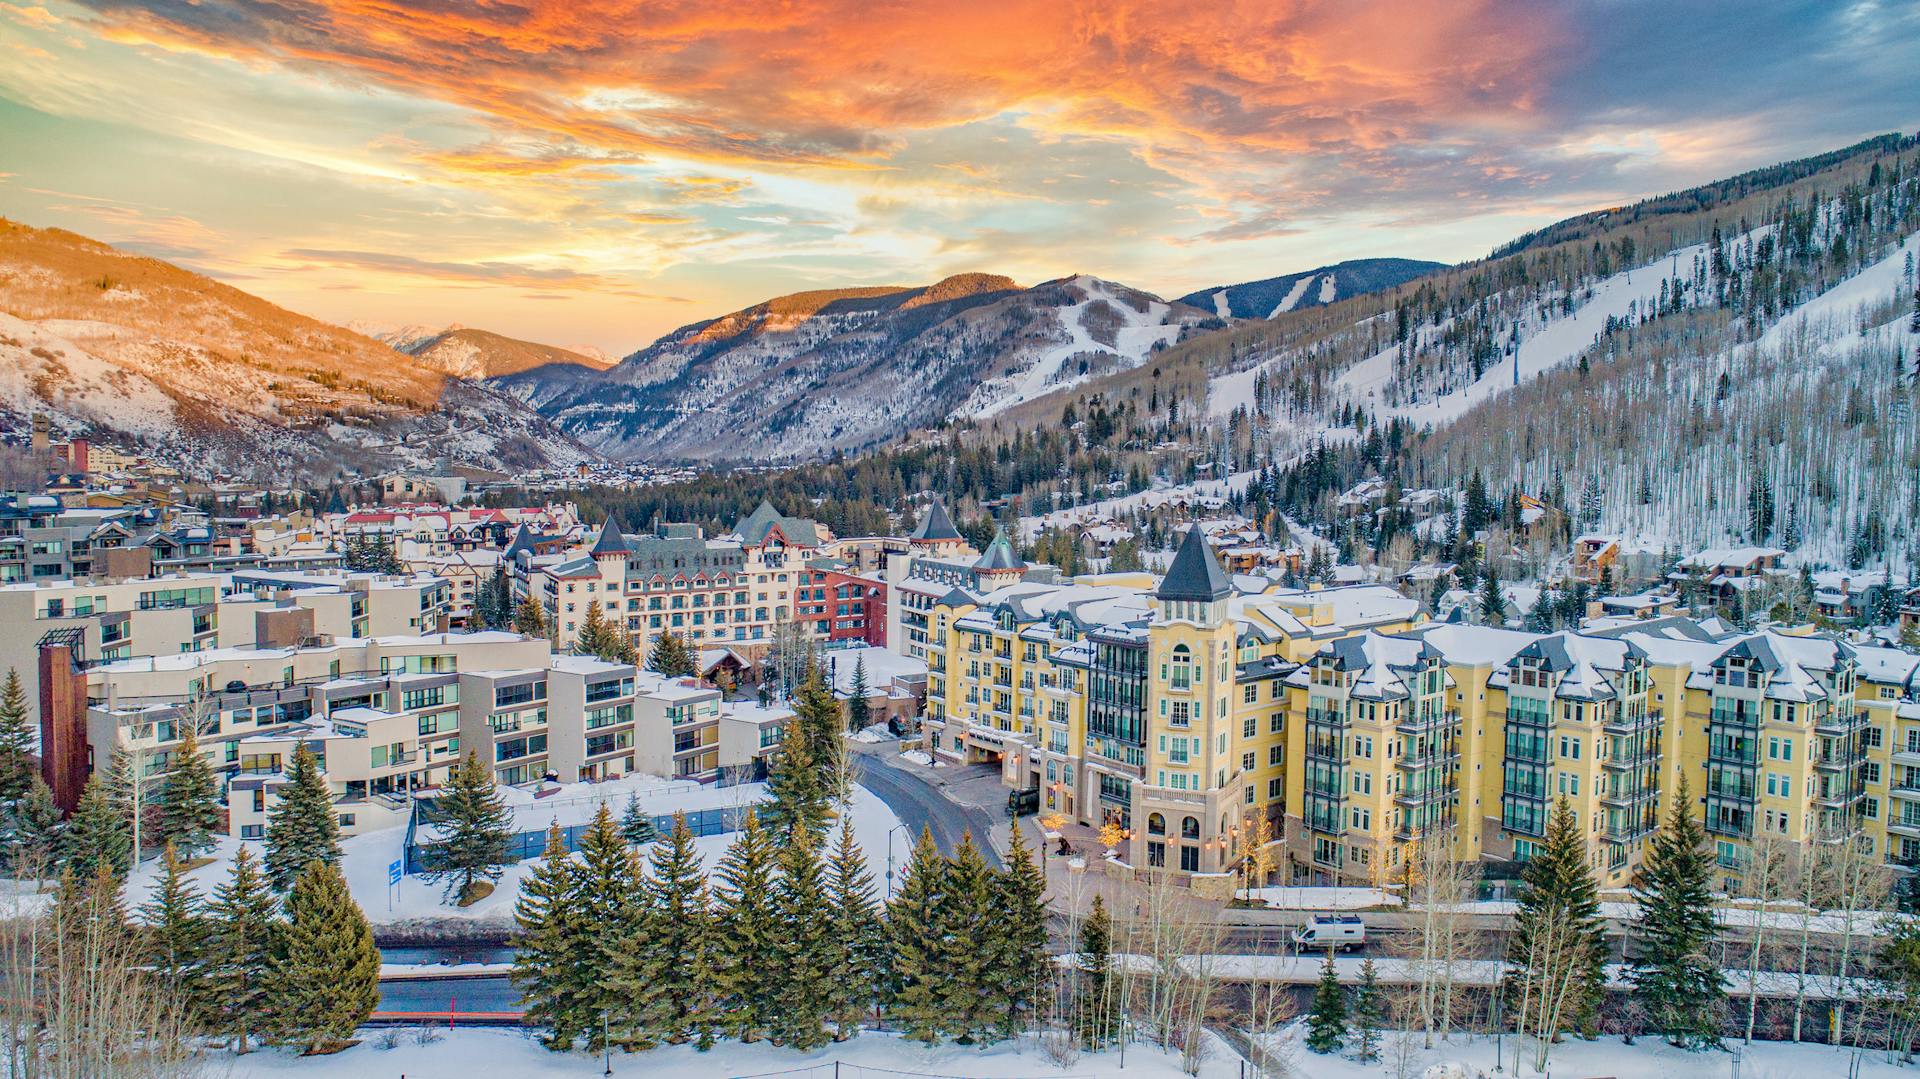 View of Vail with the mountains and sunset in the background